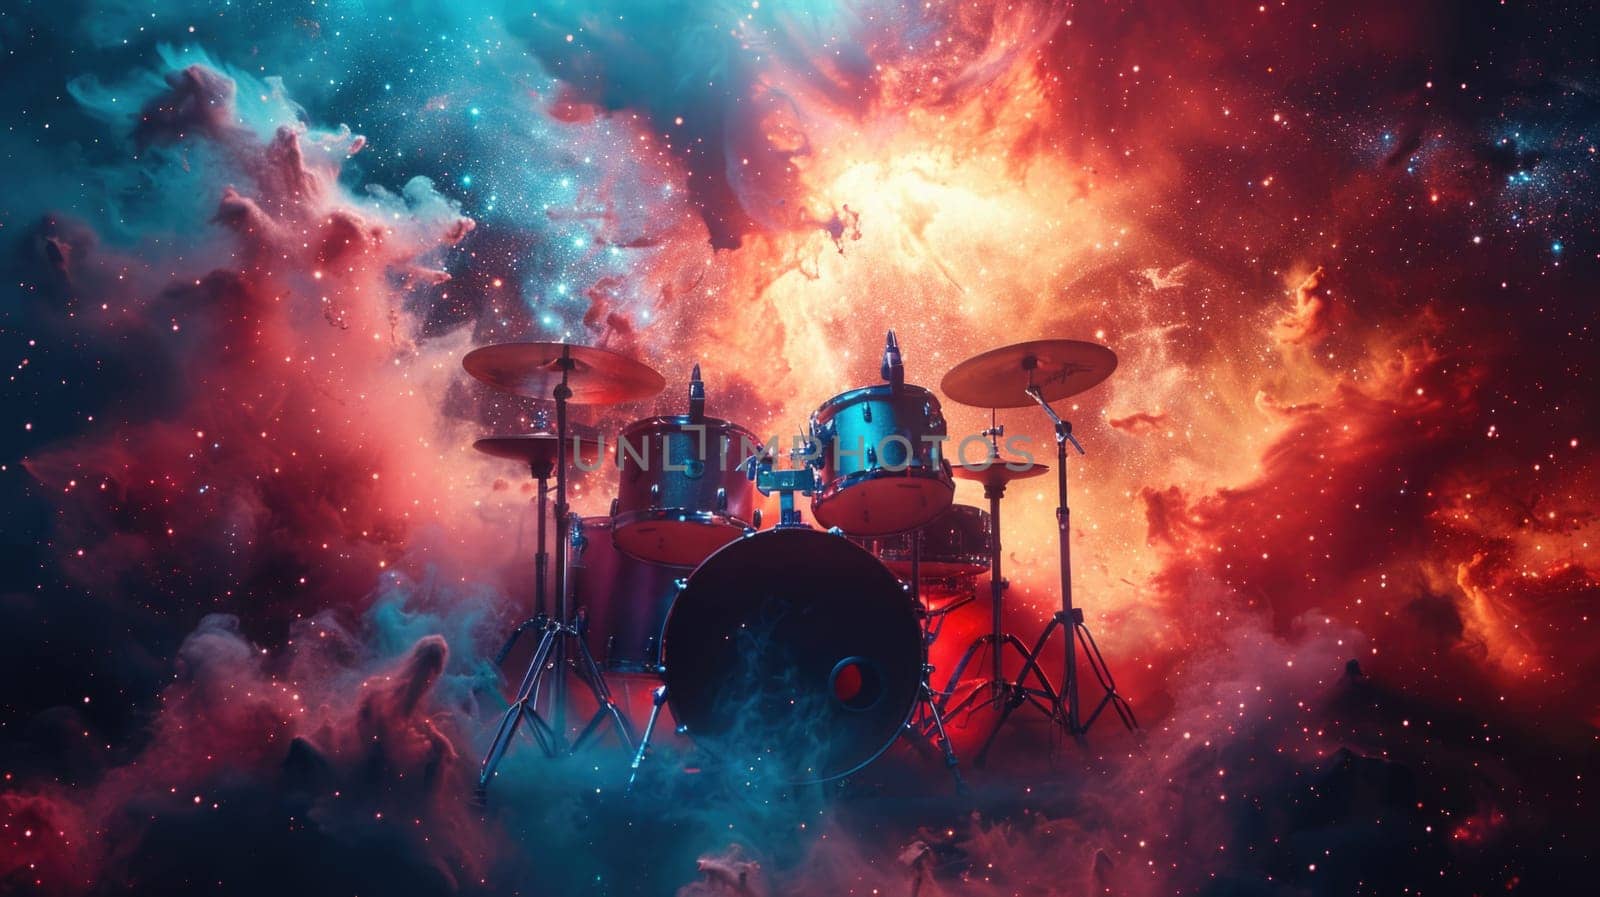 Drum Set Amidst Star-filled Space by but_photo